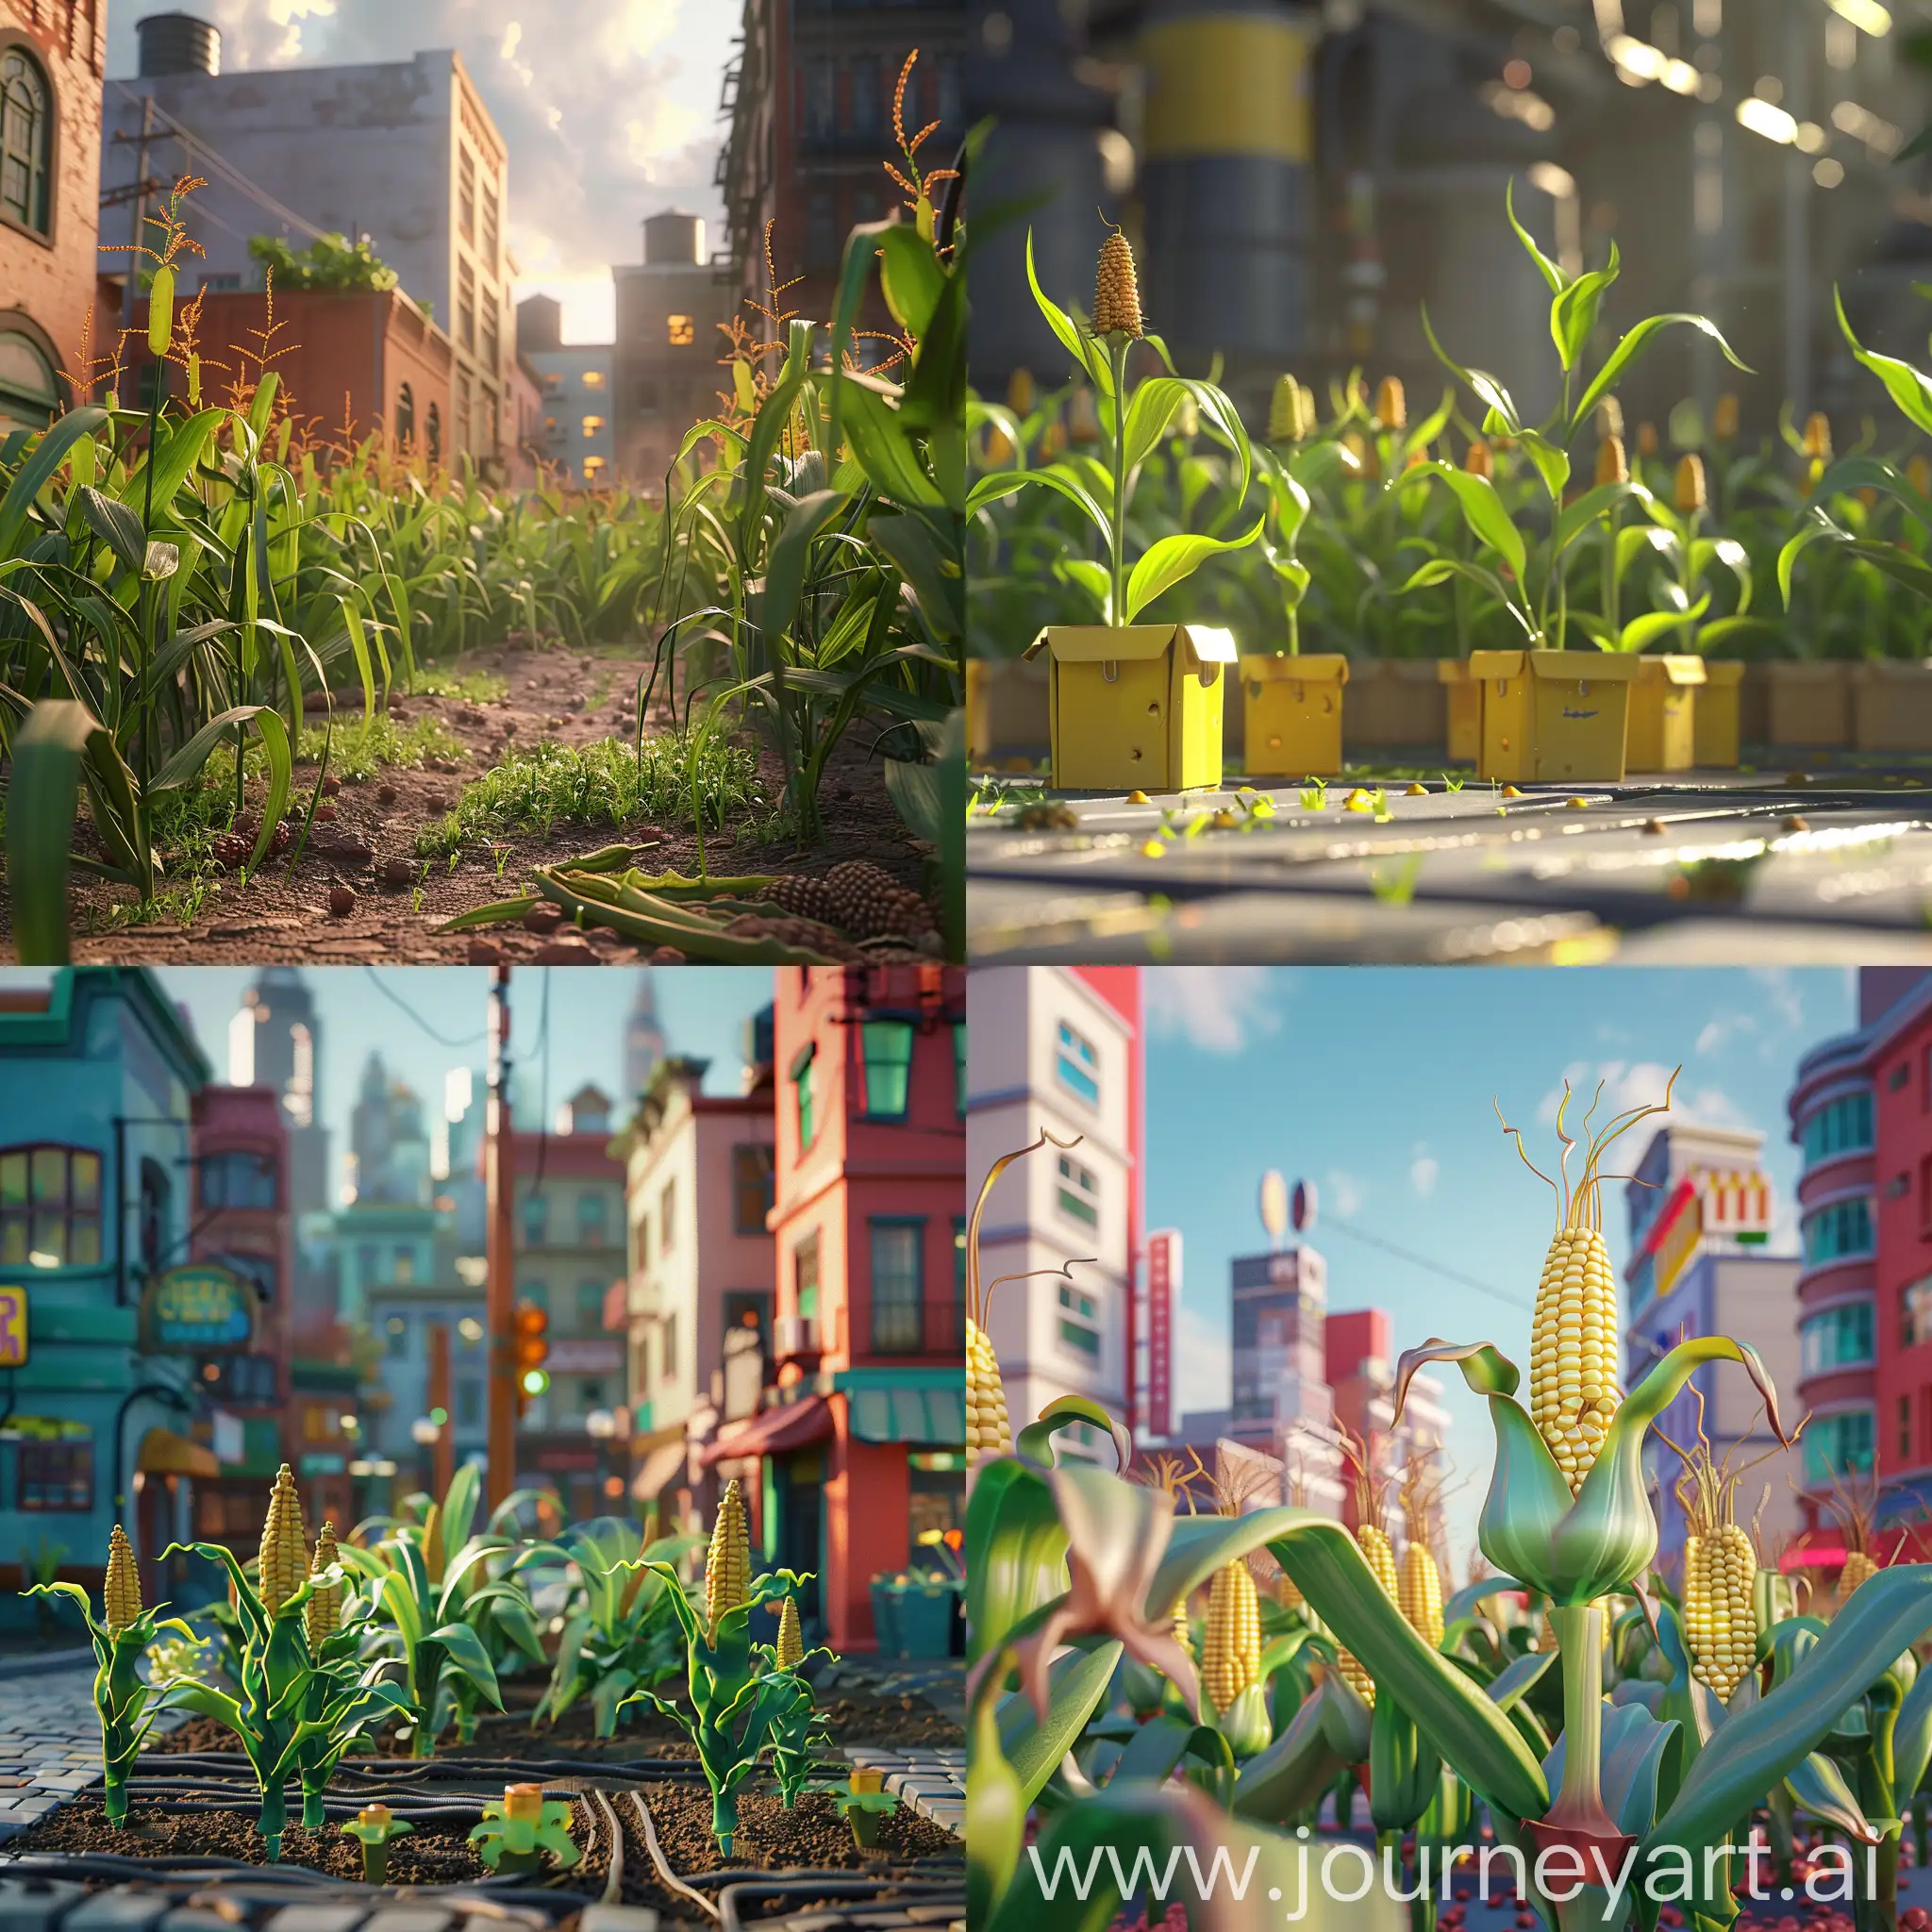 Urban-Cornfields-A-3D-Animated-Vision-of-Sustainable-City-Living